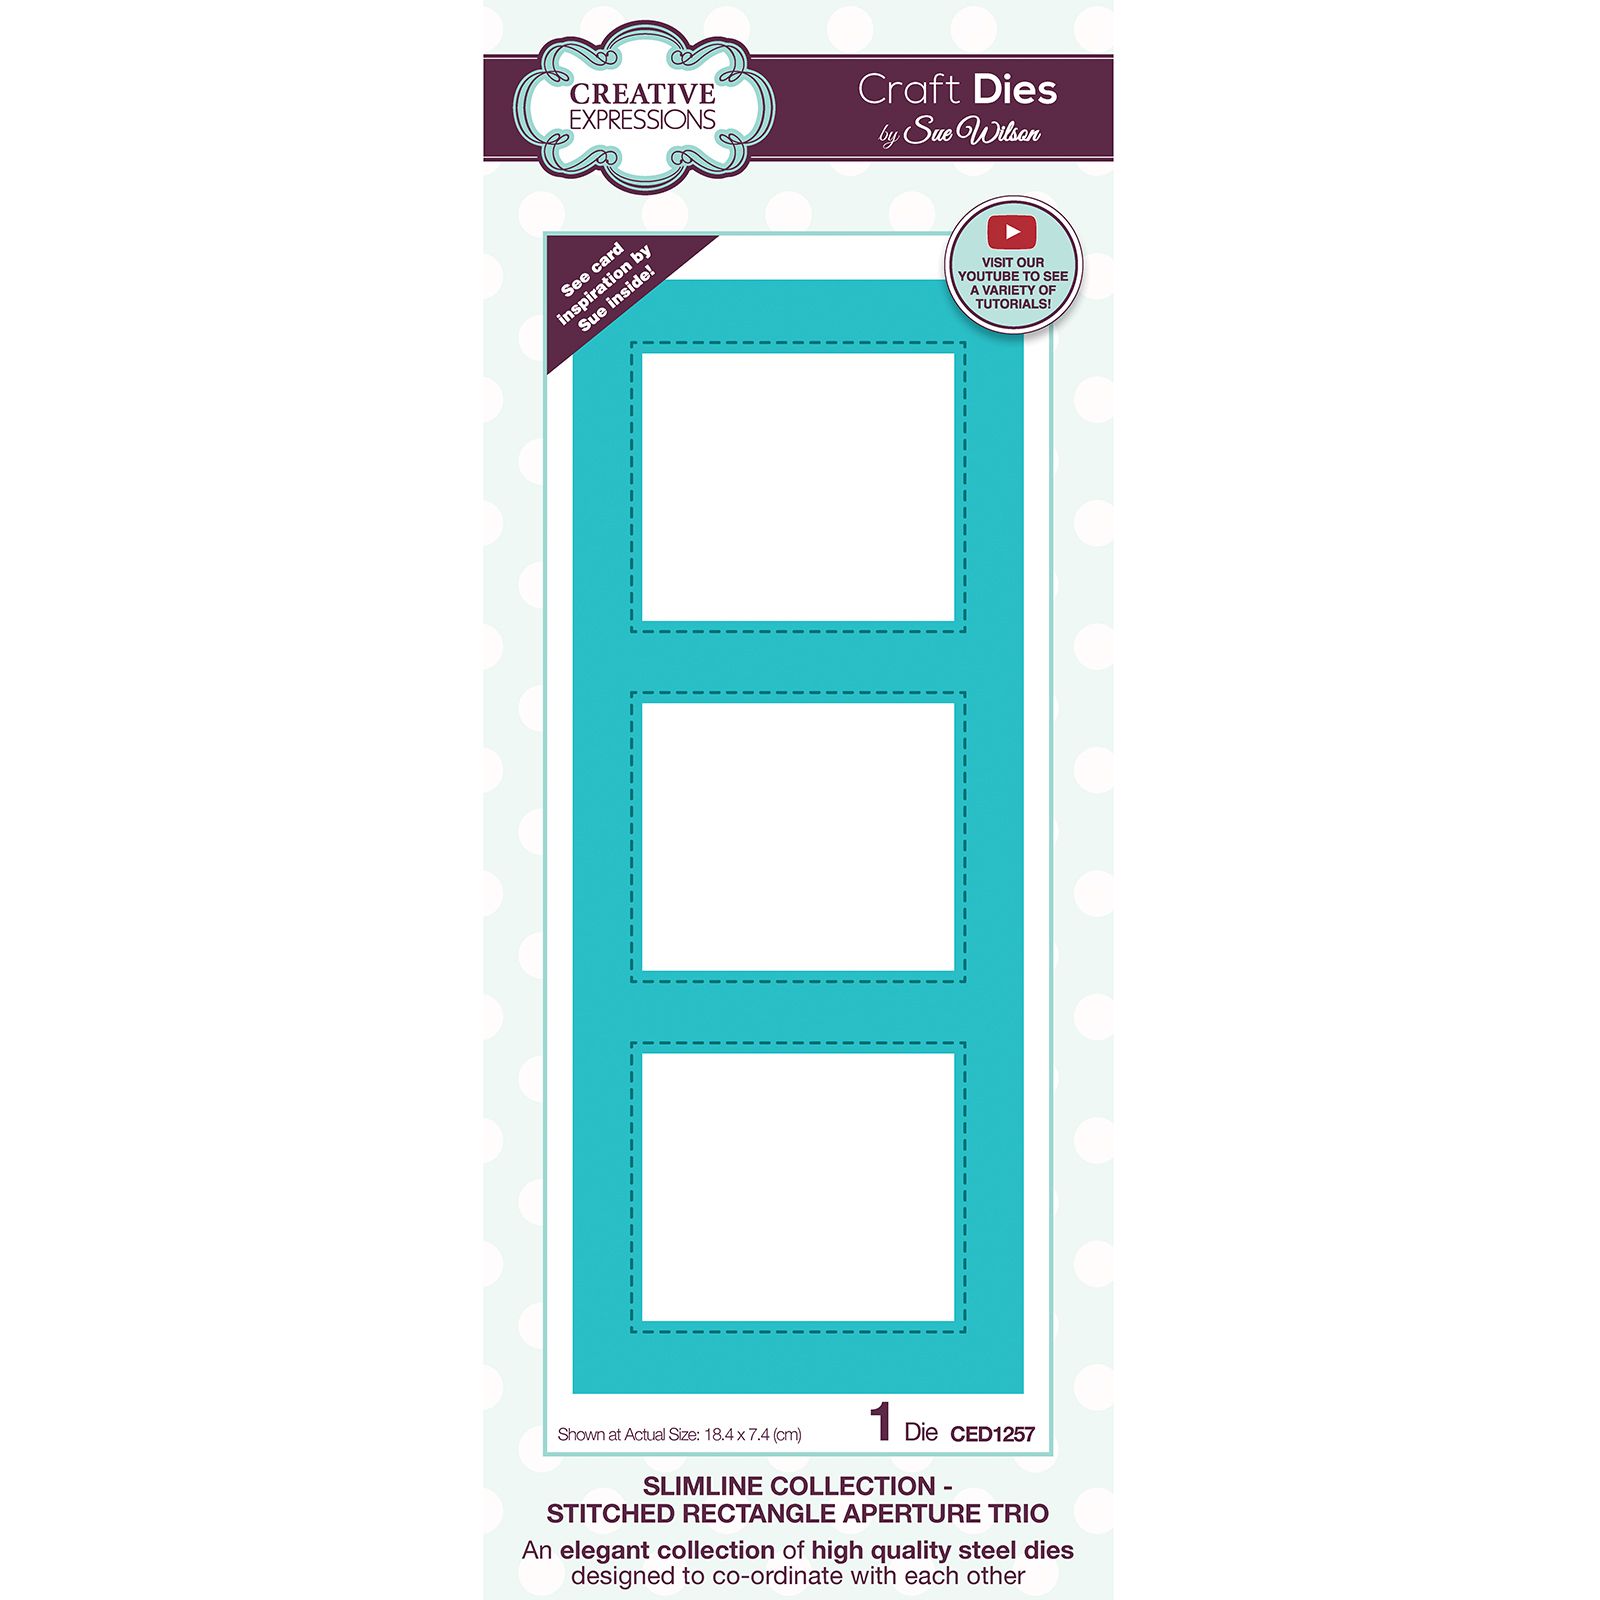 Creative Expressions • Craft die slimline Cousues trio ouverture rectangle